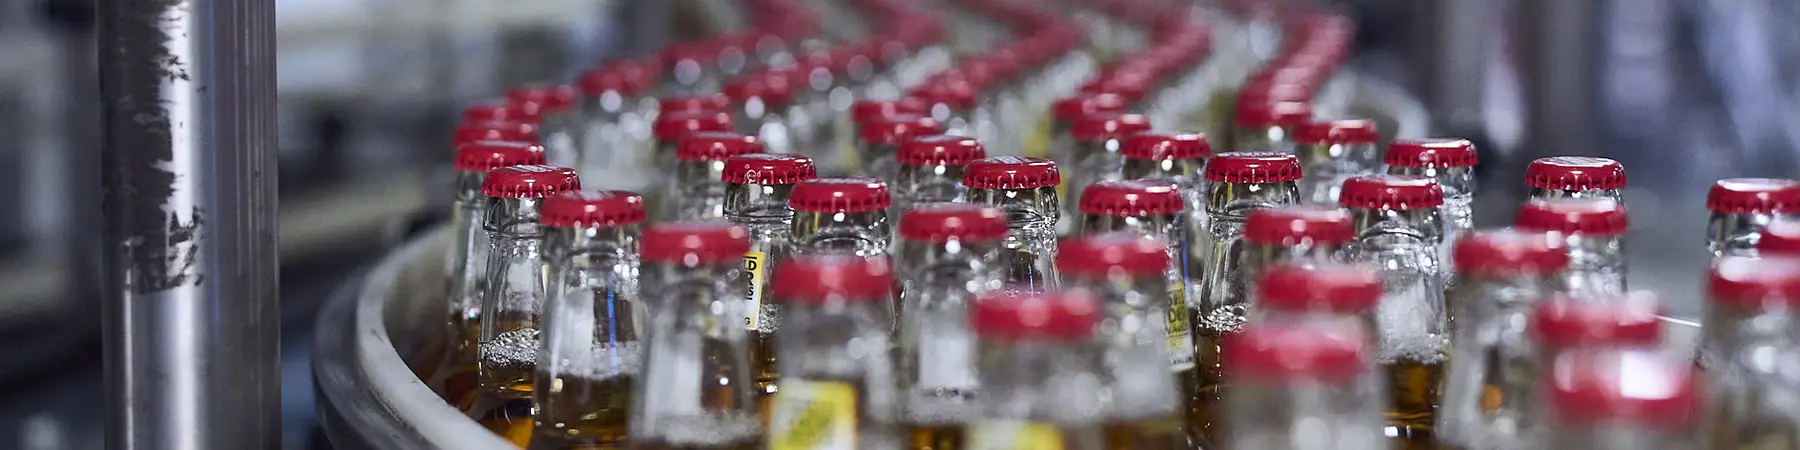 close up of production line of beers bottles on conveyor